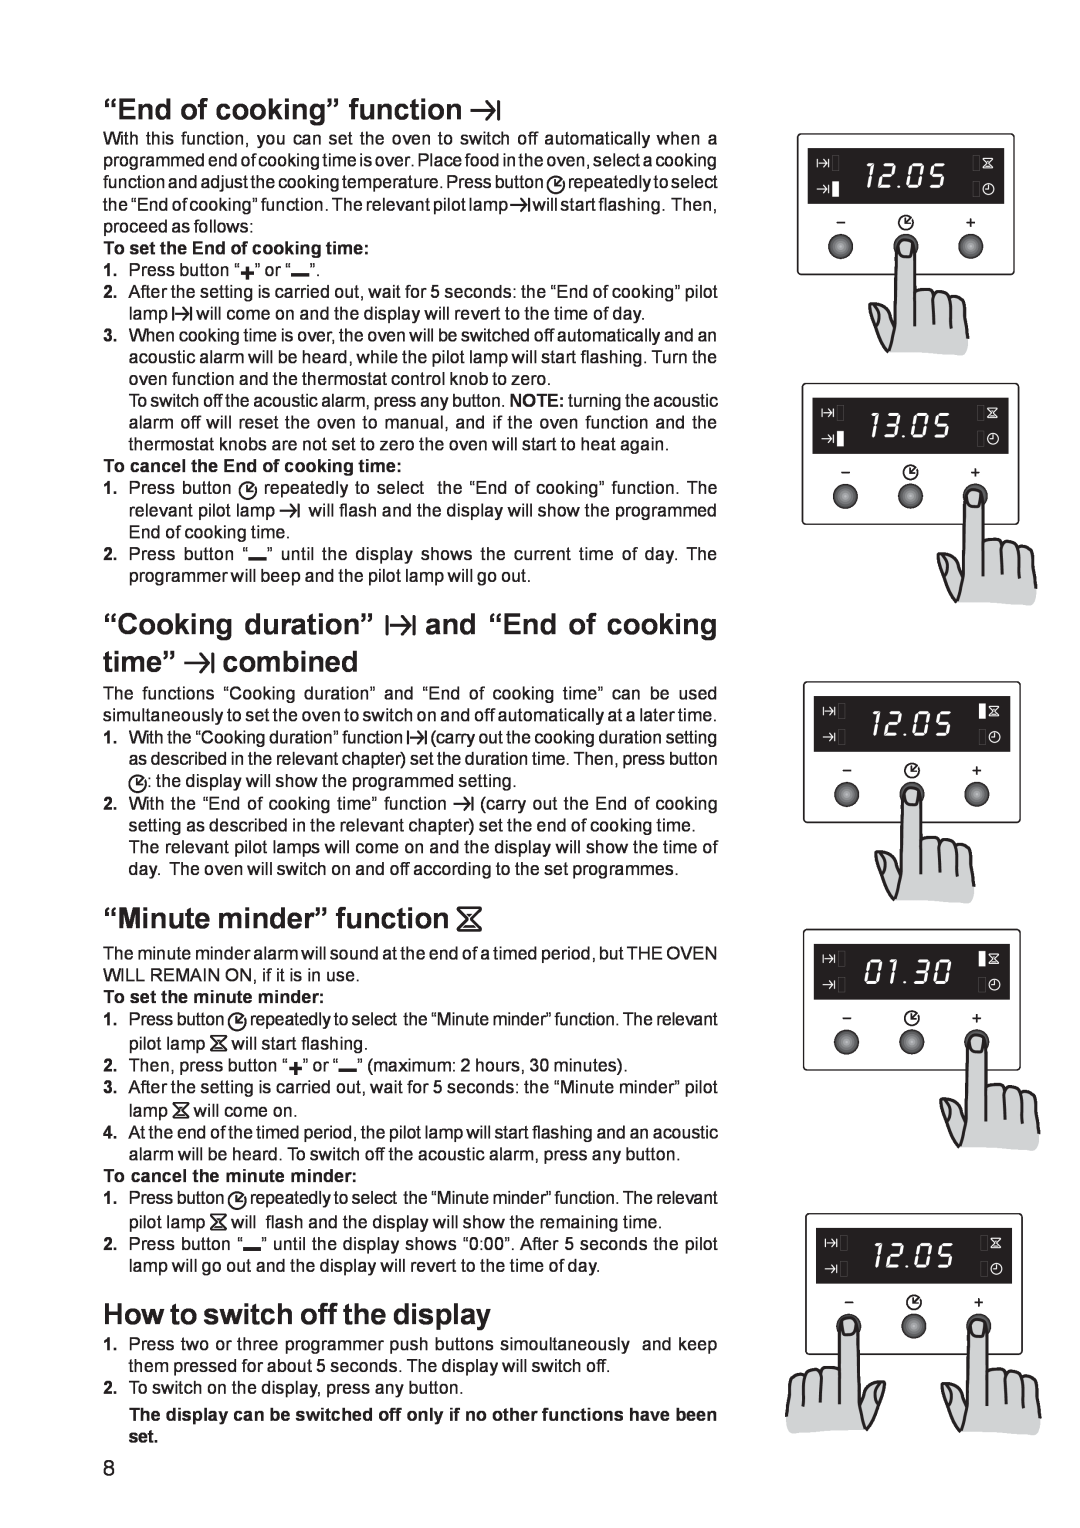 Zanussi ZBS 663 “End of cooking” function, “Cooking duration” and “End of cooking time” combined, “Minute minder” function 